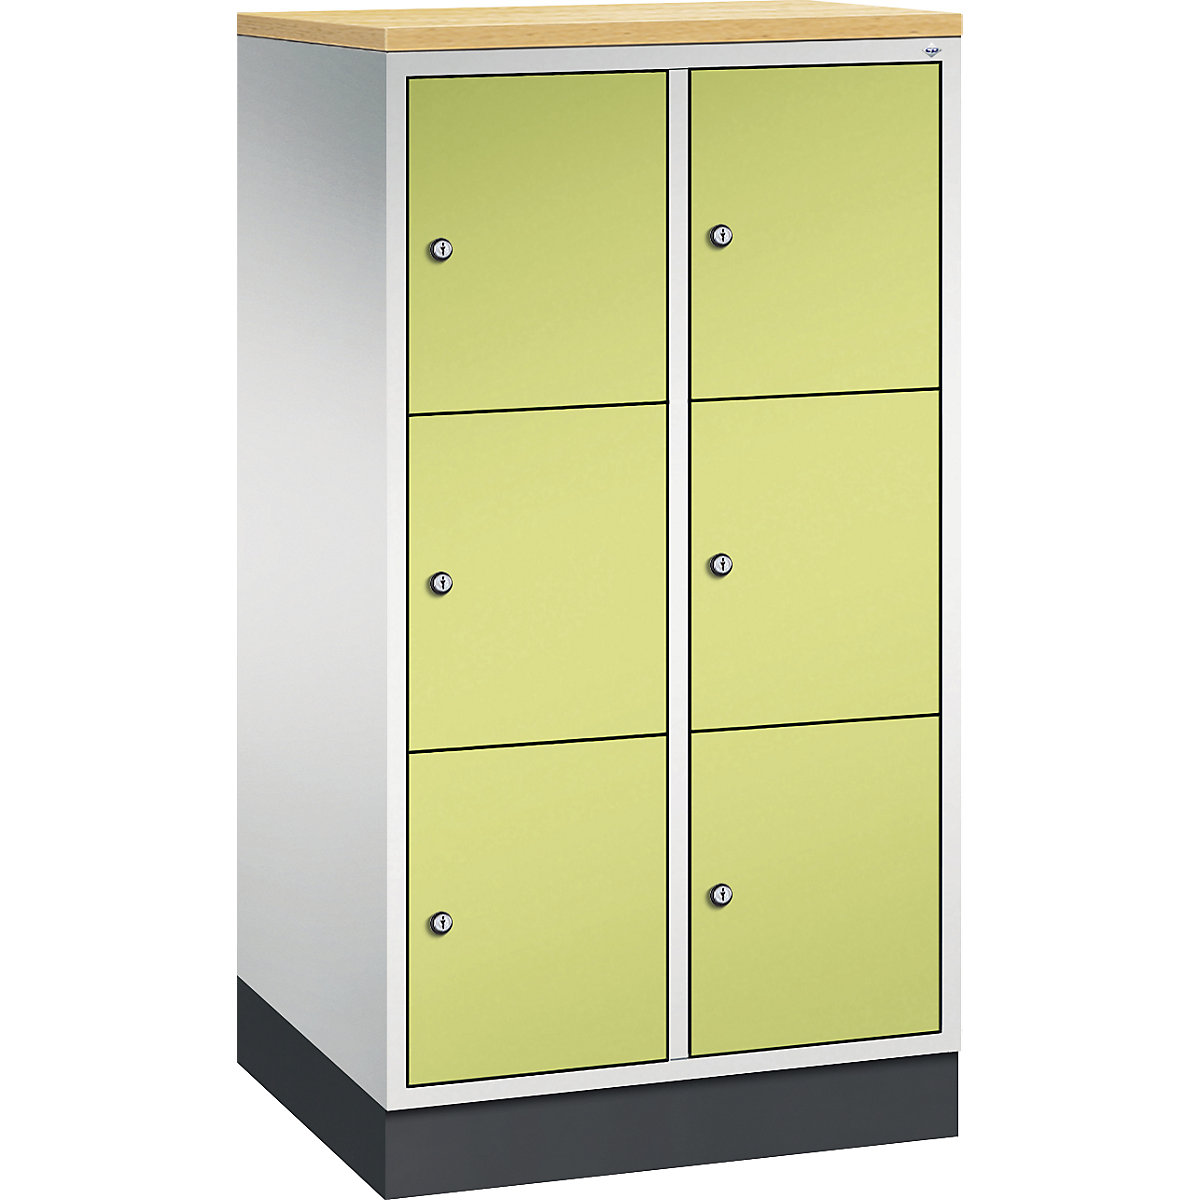 INTRO steel compartment locker, compartment height 345 mm – C+P, WxD 620 x 500 mm, 6 compartments, light grey body, viridian green doors